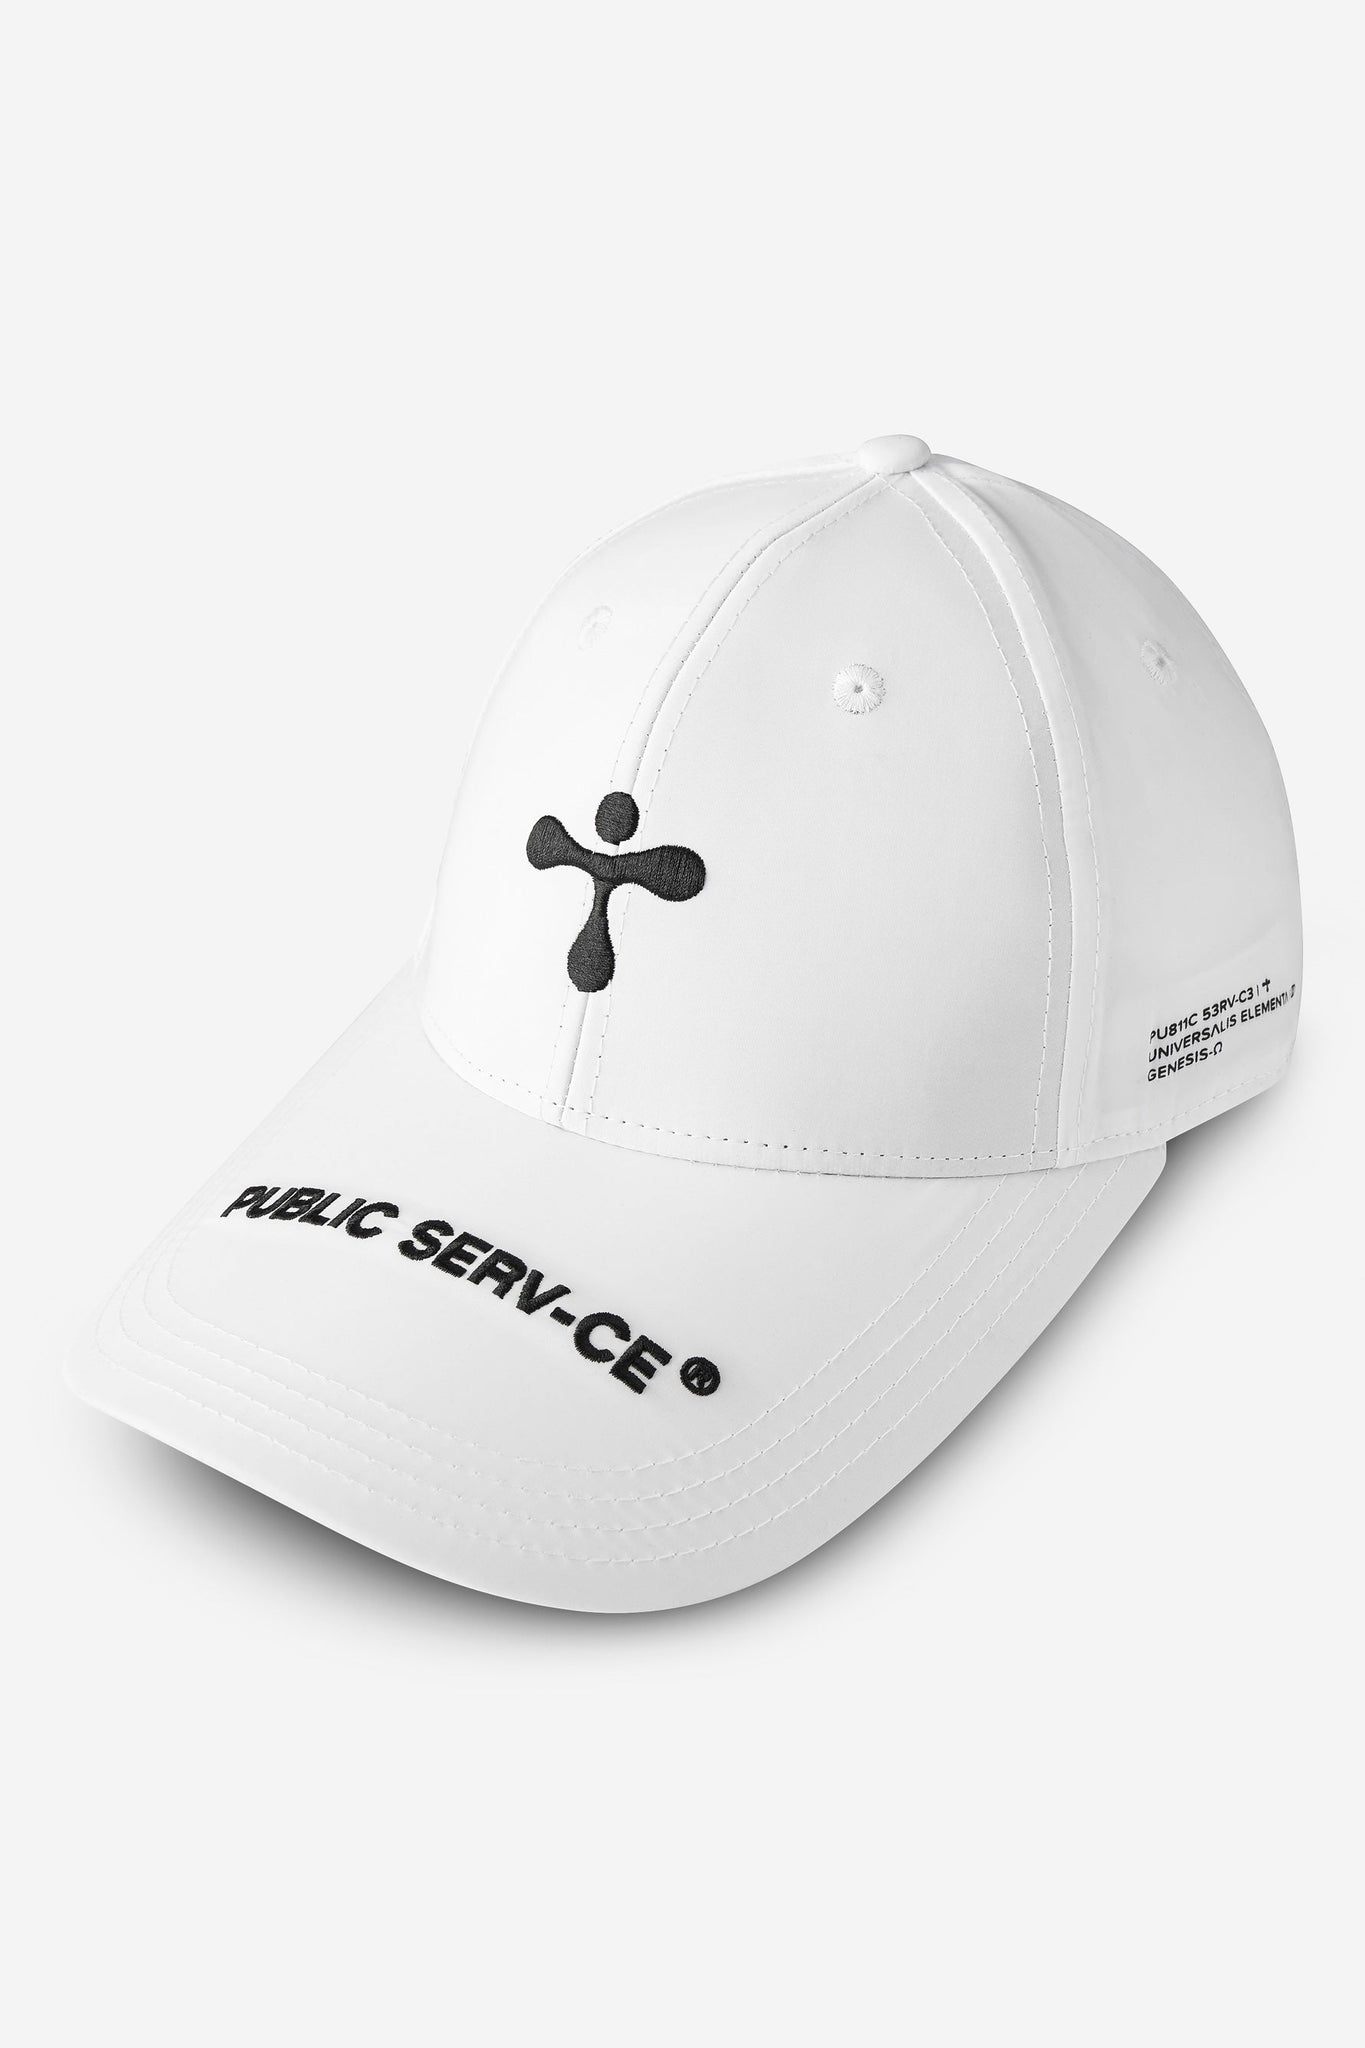 alt="3/4 close up of  white cap with 3D stitching, elongated visor and contrast prints"